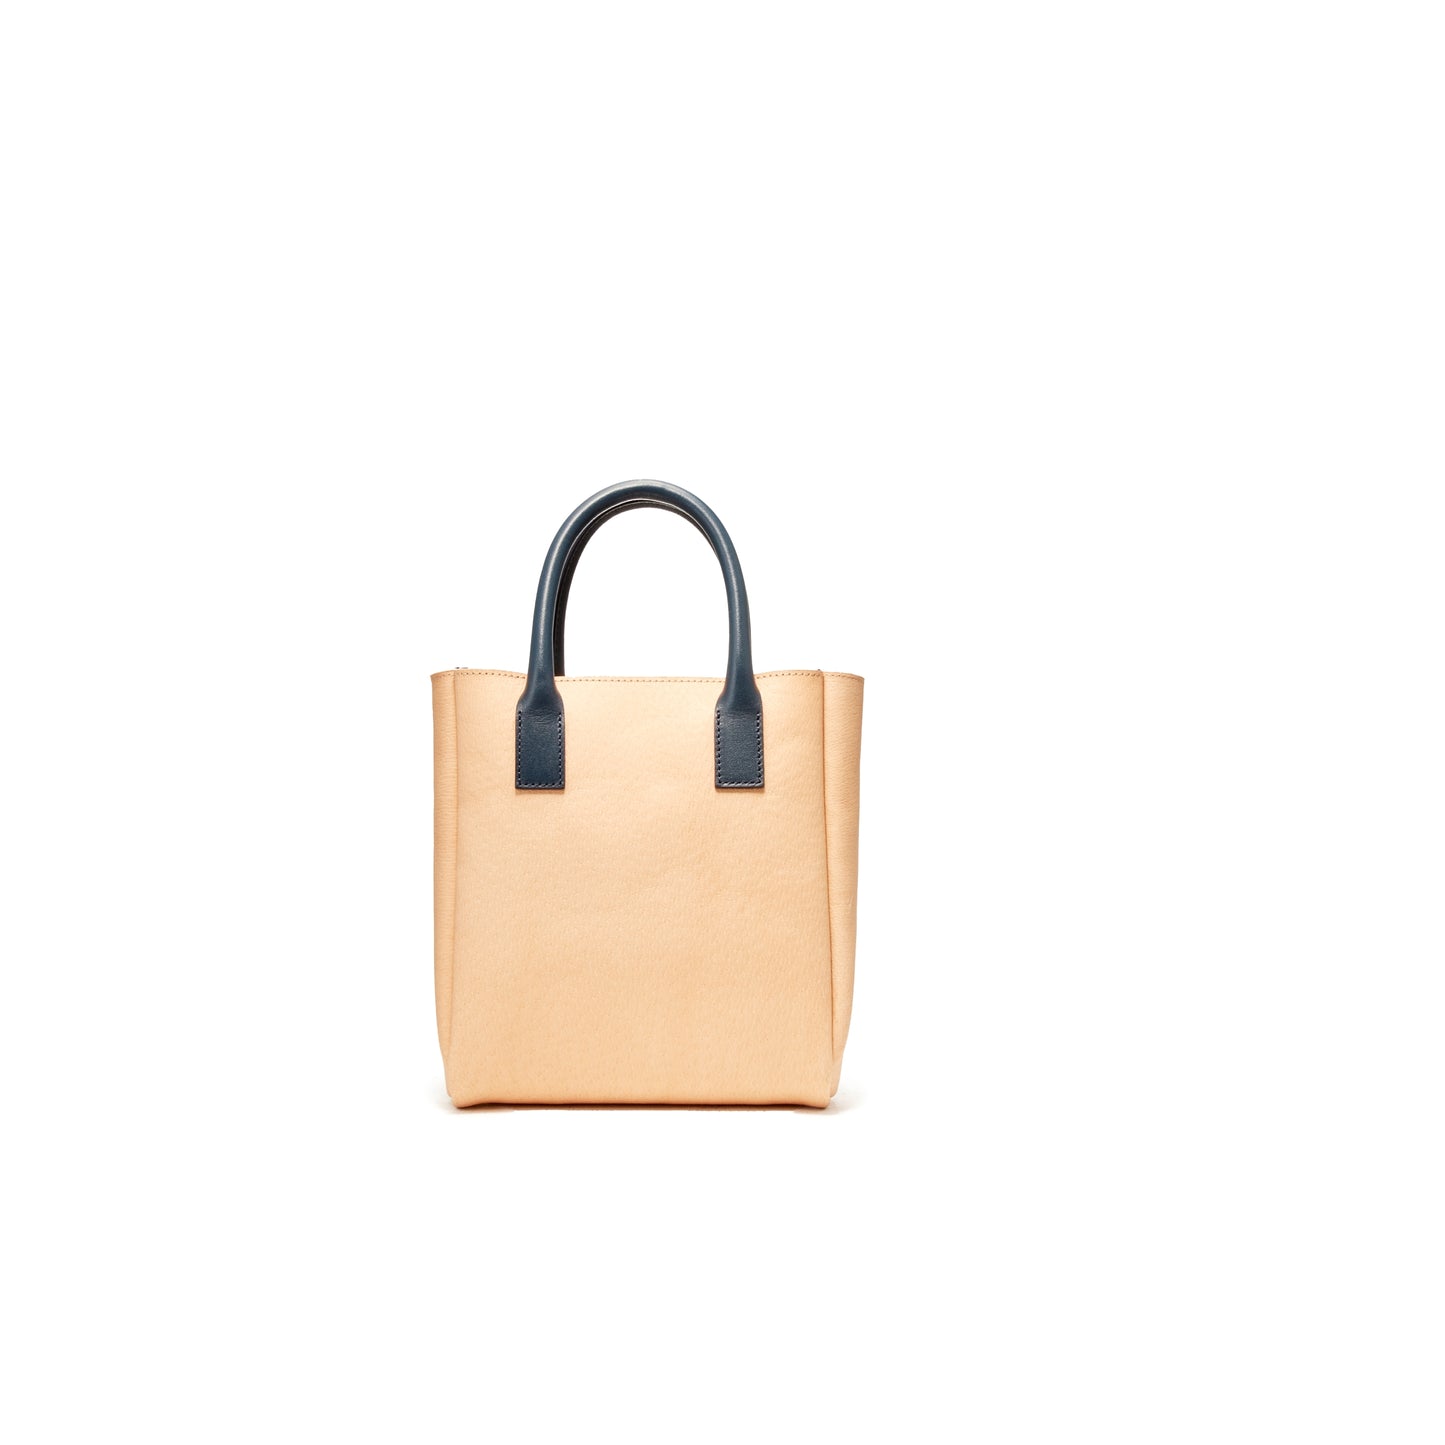 INVERSE TOTE s - NAVY/IVORY